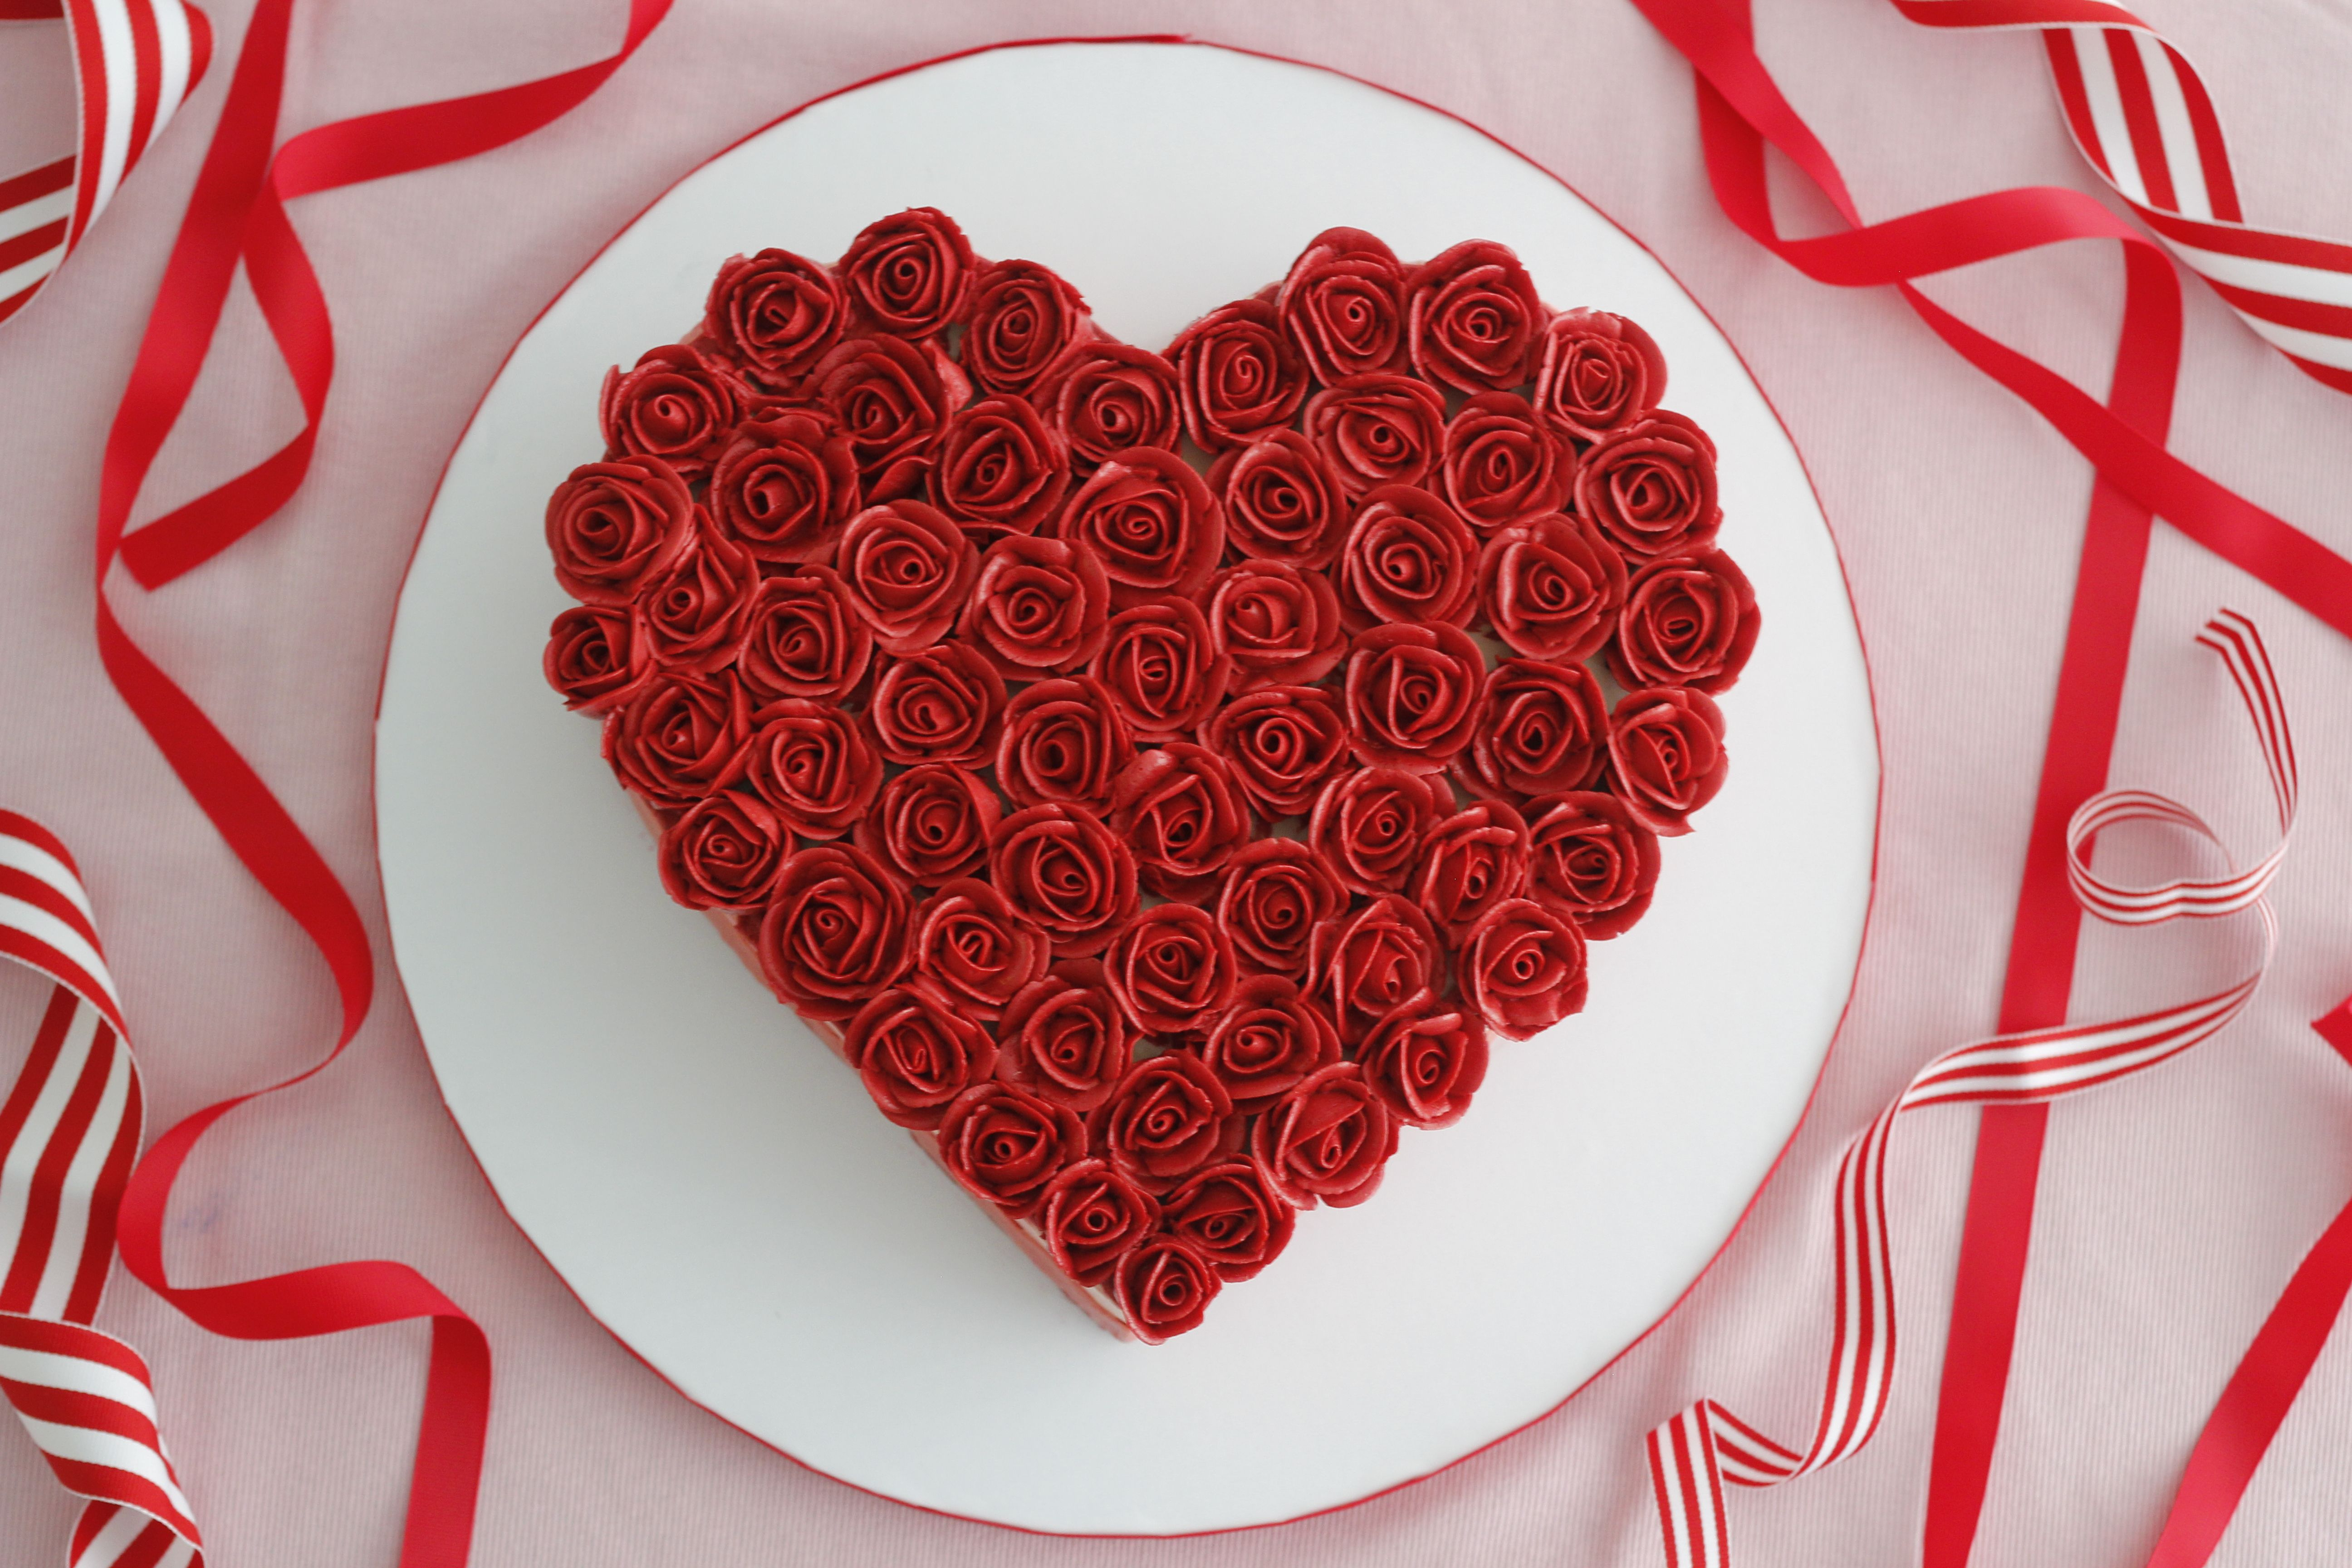 10 Beautiful Heart Shaped Cake Decorating Ideas heart shaped cake with buttercream roses cakes sweets heart 2024